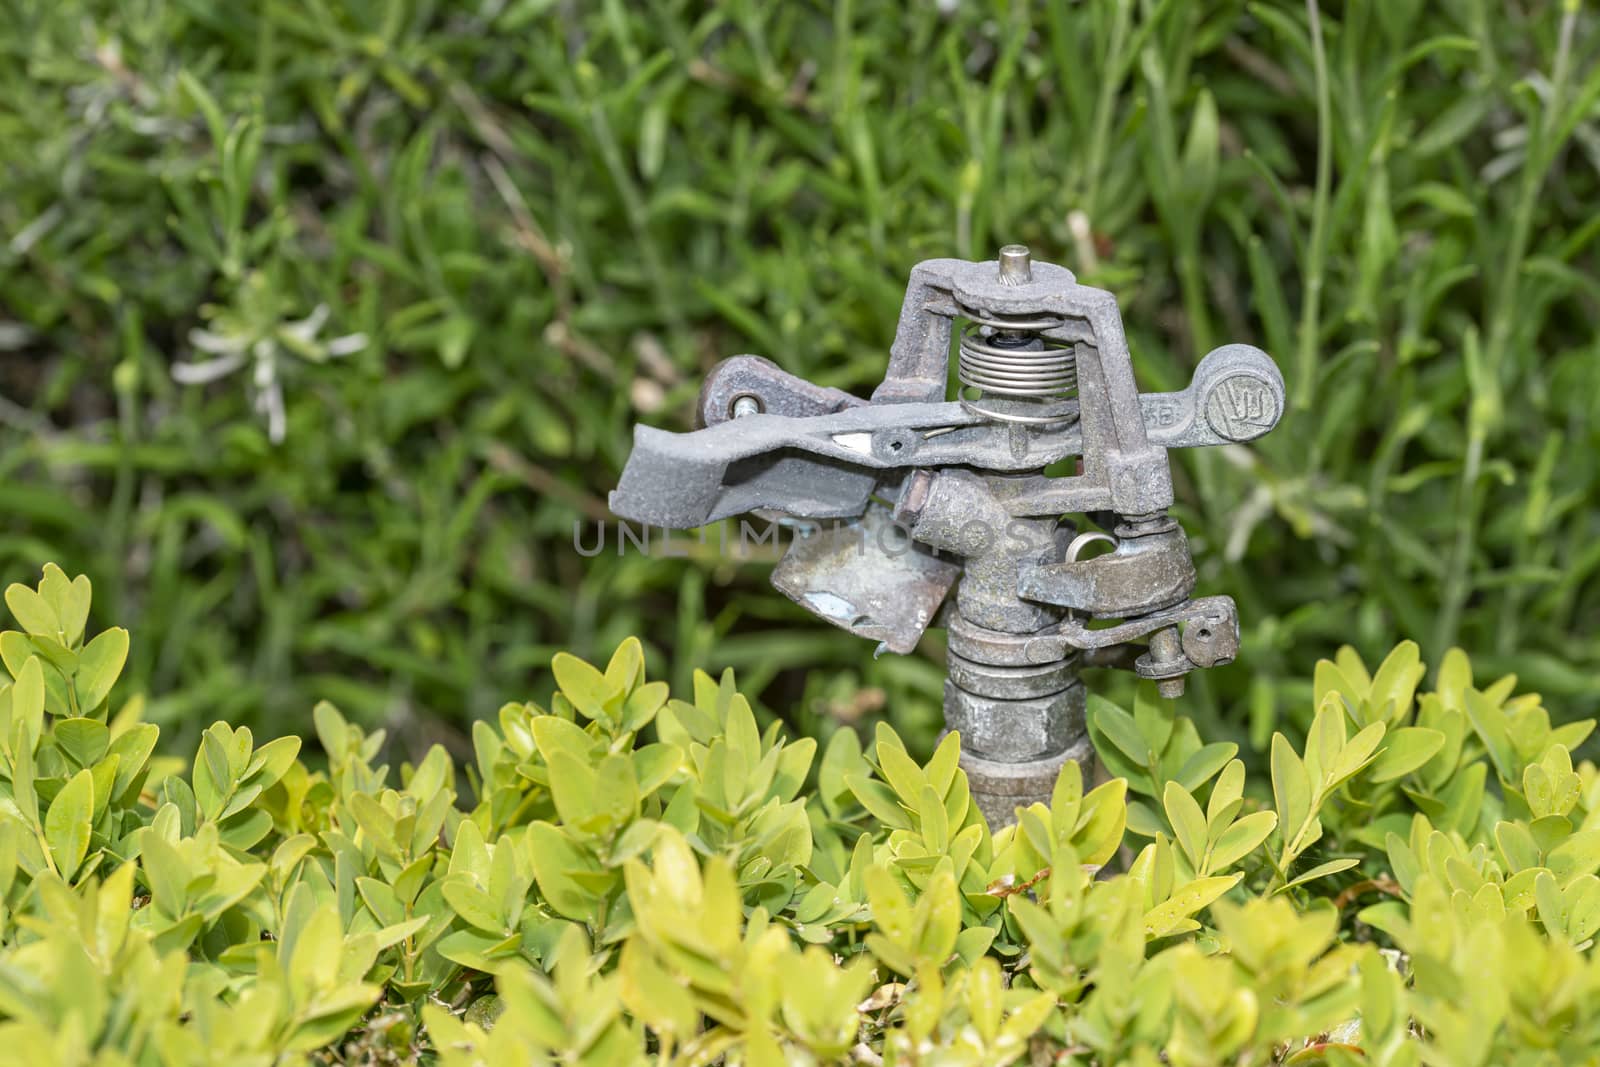 An Irrigation sprinkler at the edge of the garden ready to irrigate the dry grass and the end of the day by ankorlight